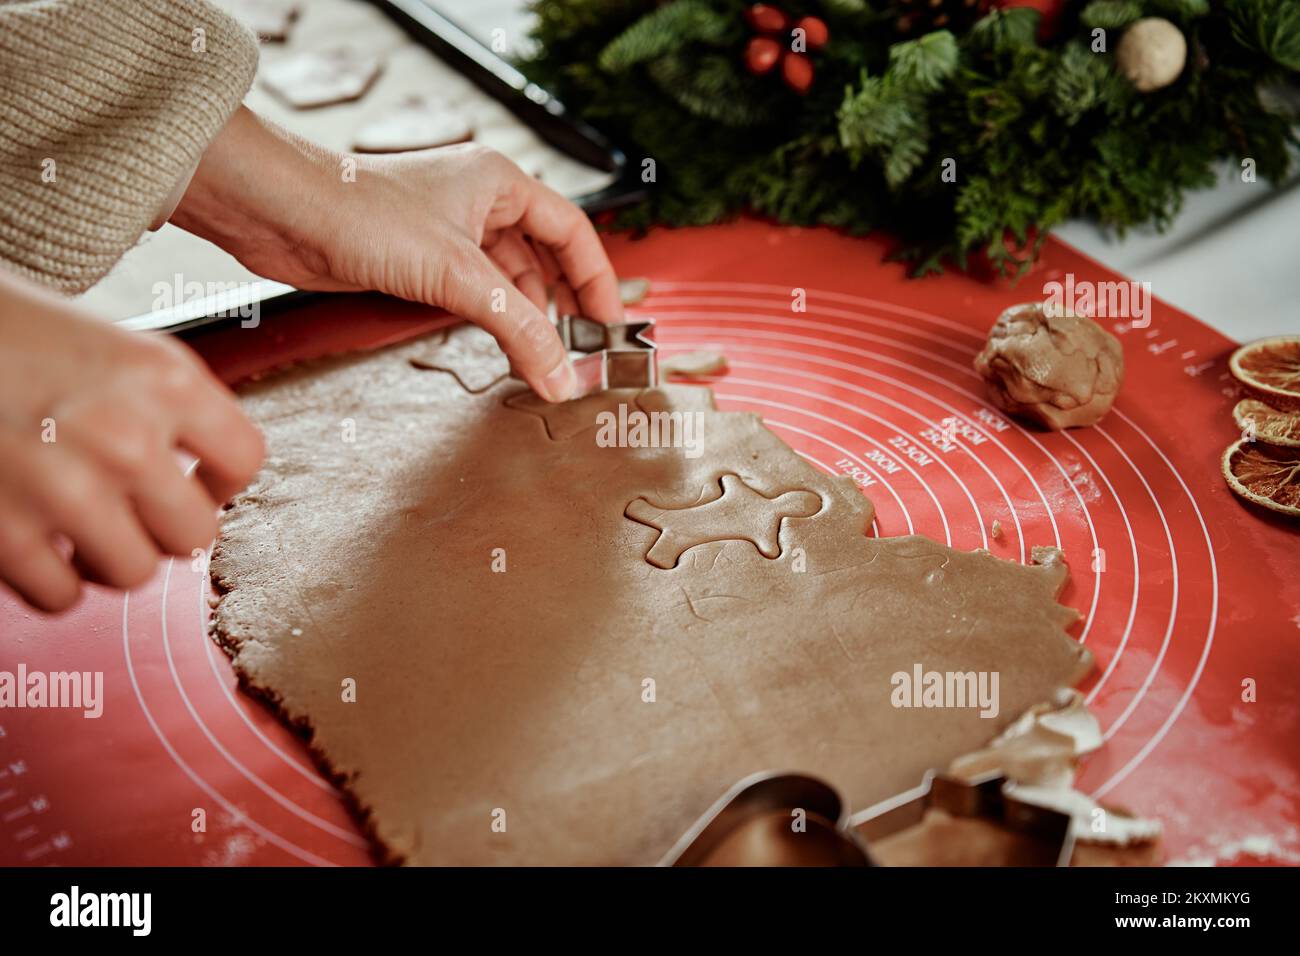 Woman preparing gingerbread cookies at kitchen with Christmas decorations. Female hands cutting ginger dough with cutter to making cookies for winter holidays Stock Photo